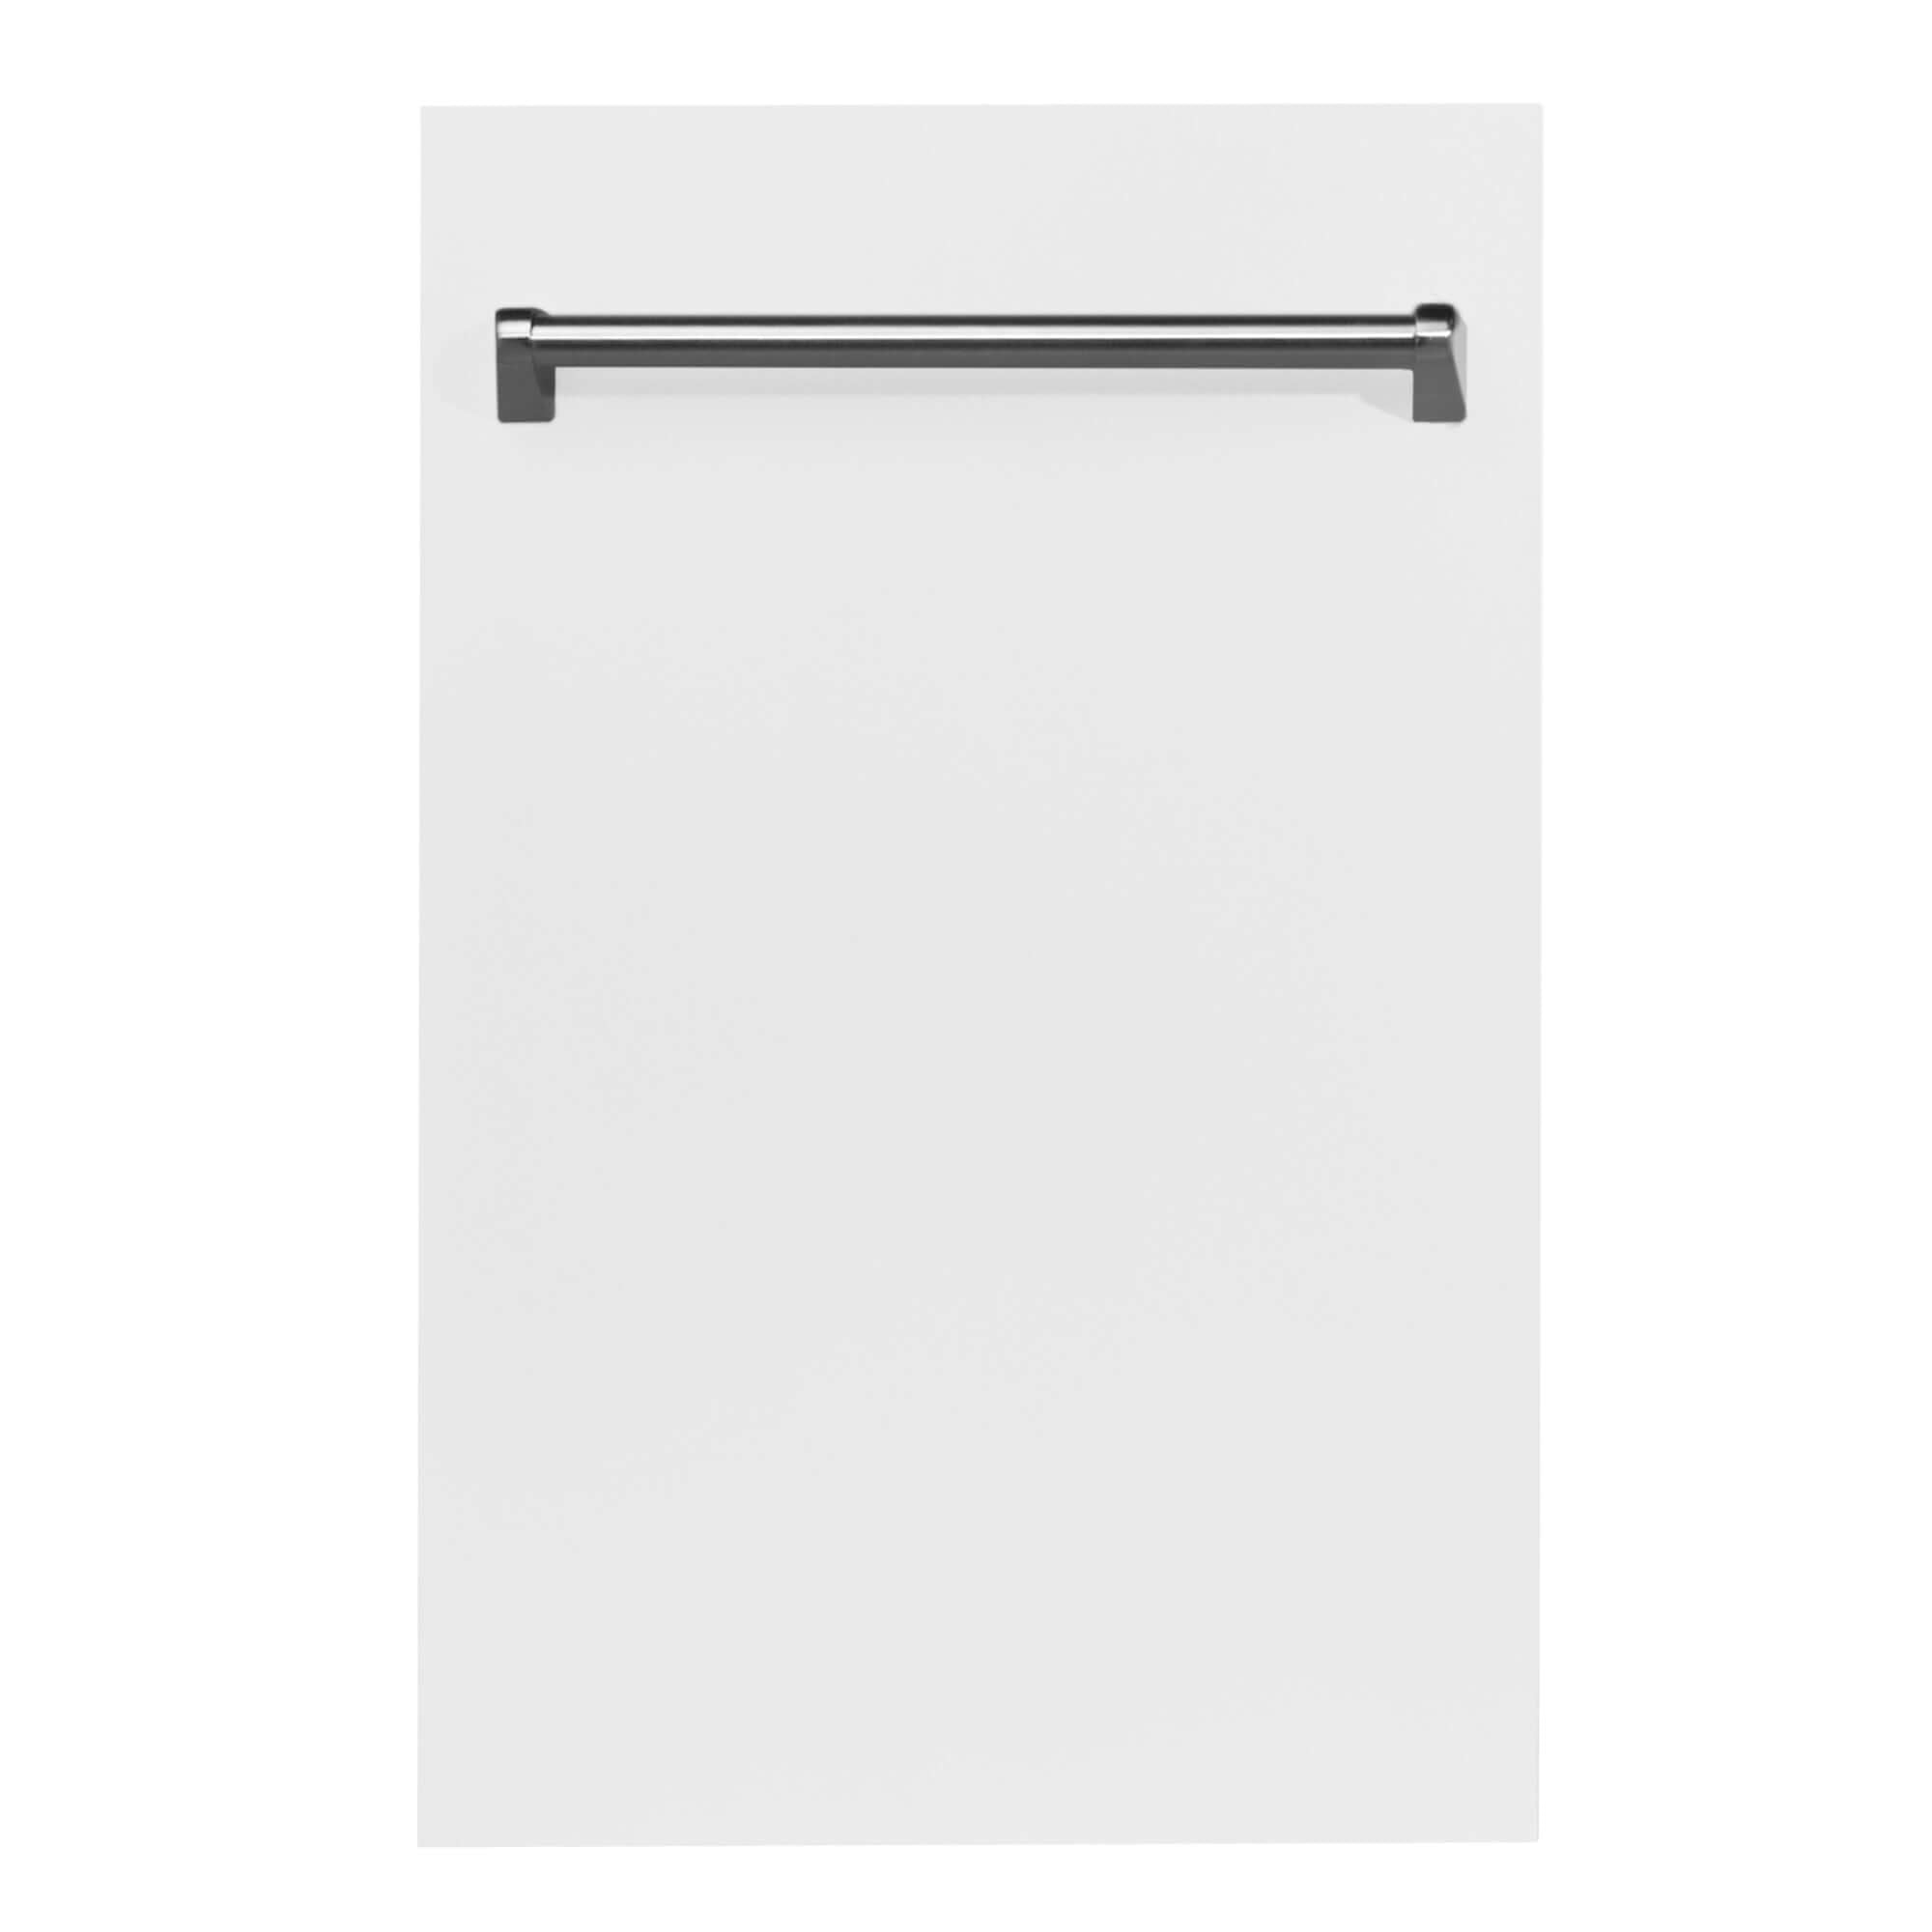 ZLINE 18 in. Compact Top Control Dishwasher with White Matte Panel and Traditional Handle, 52dBa (DW-WM-18)